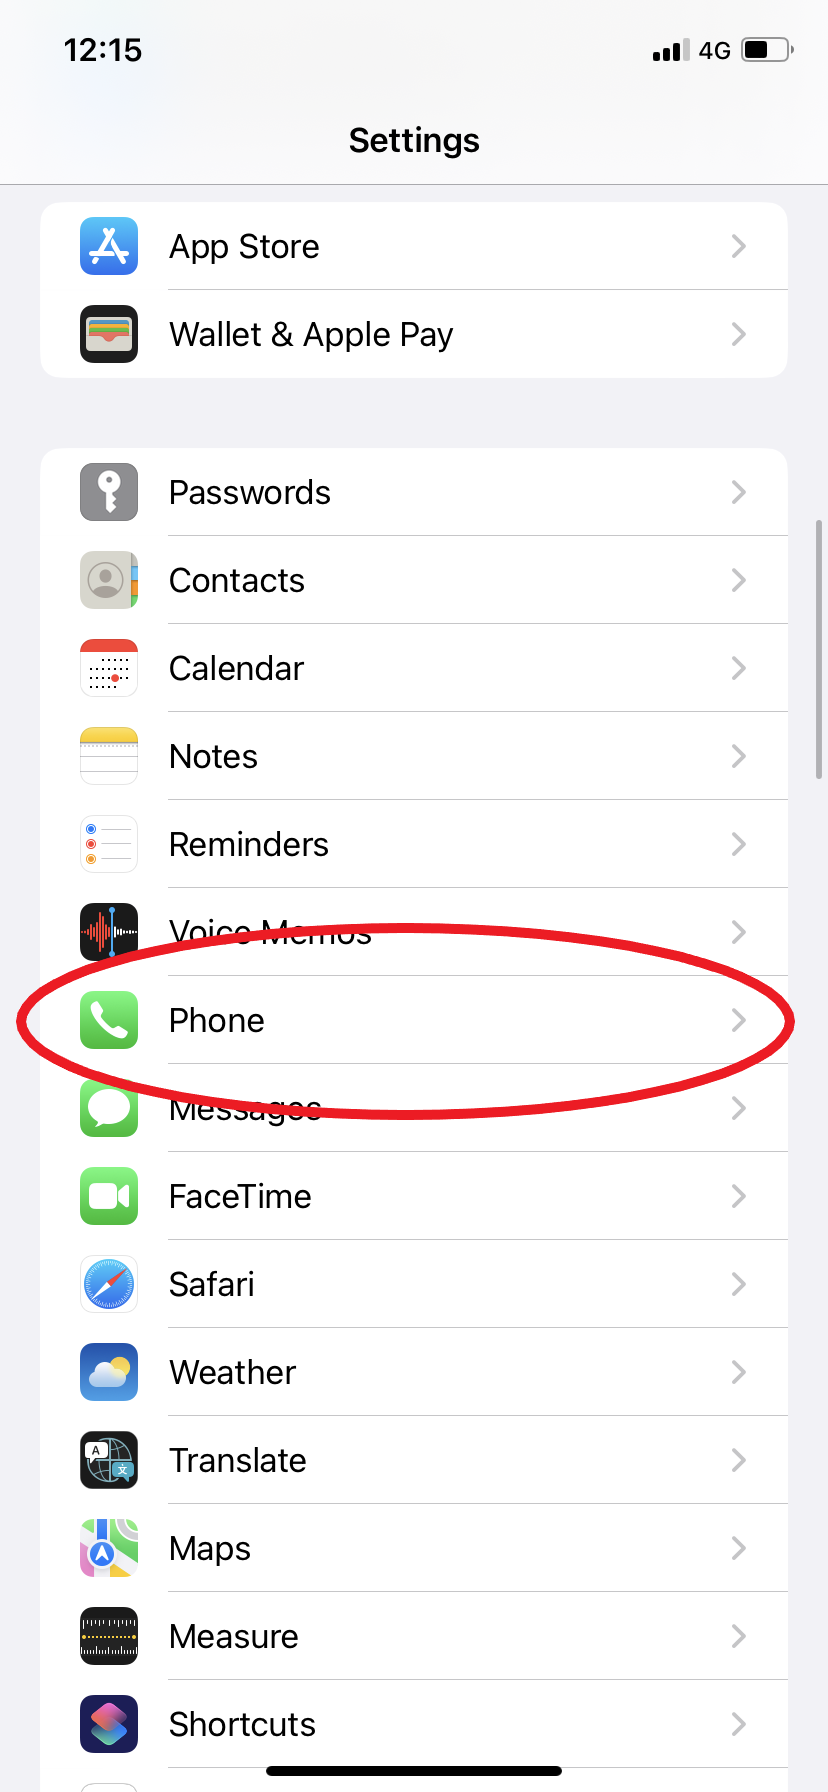 How to check your phone number on iPhone